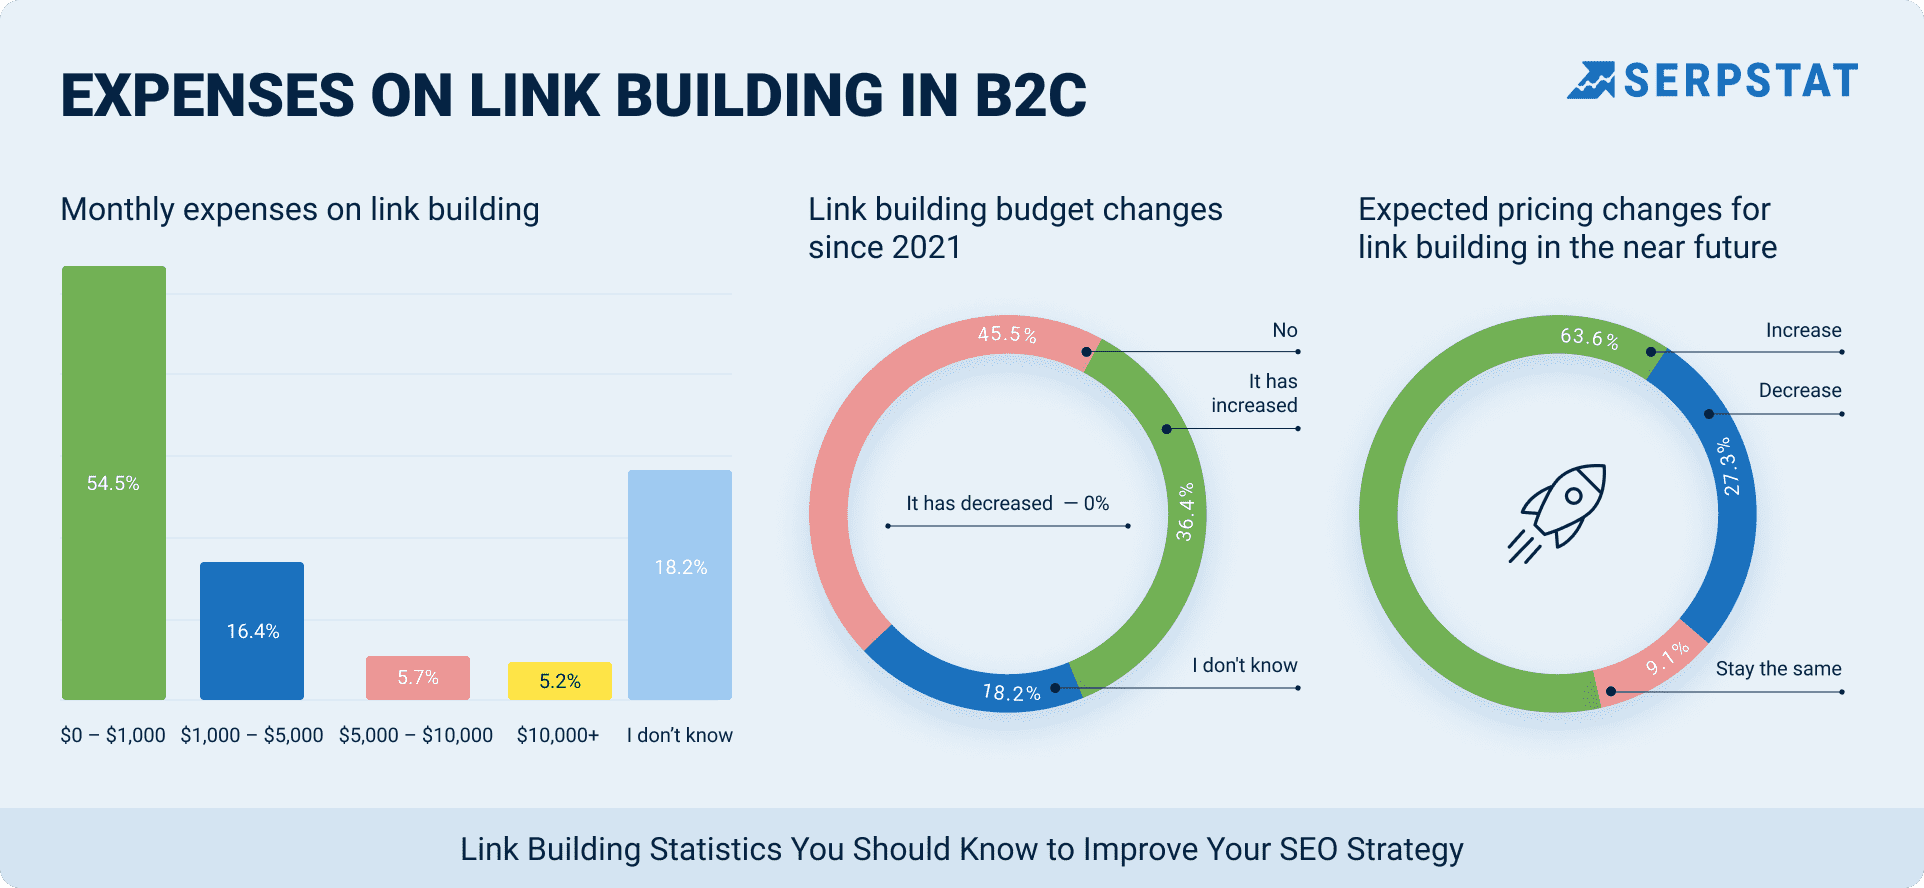 Expenses on link building in B2C